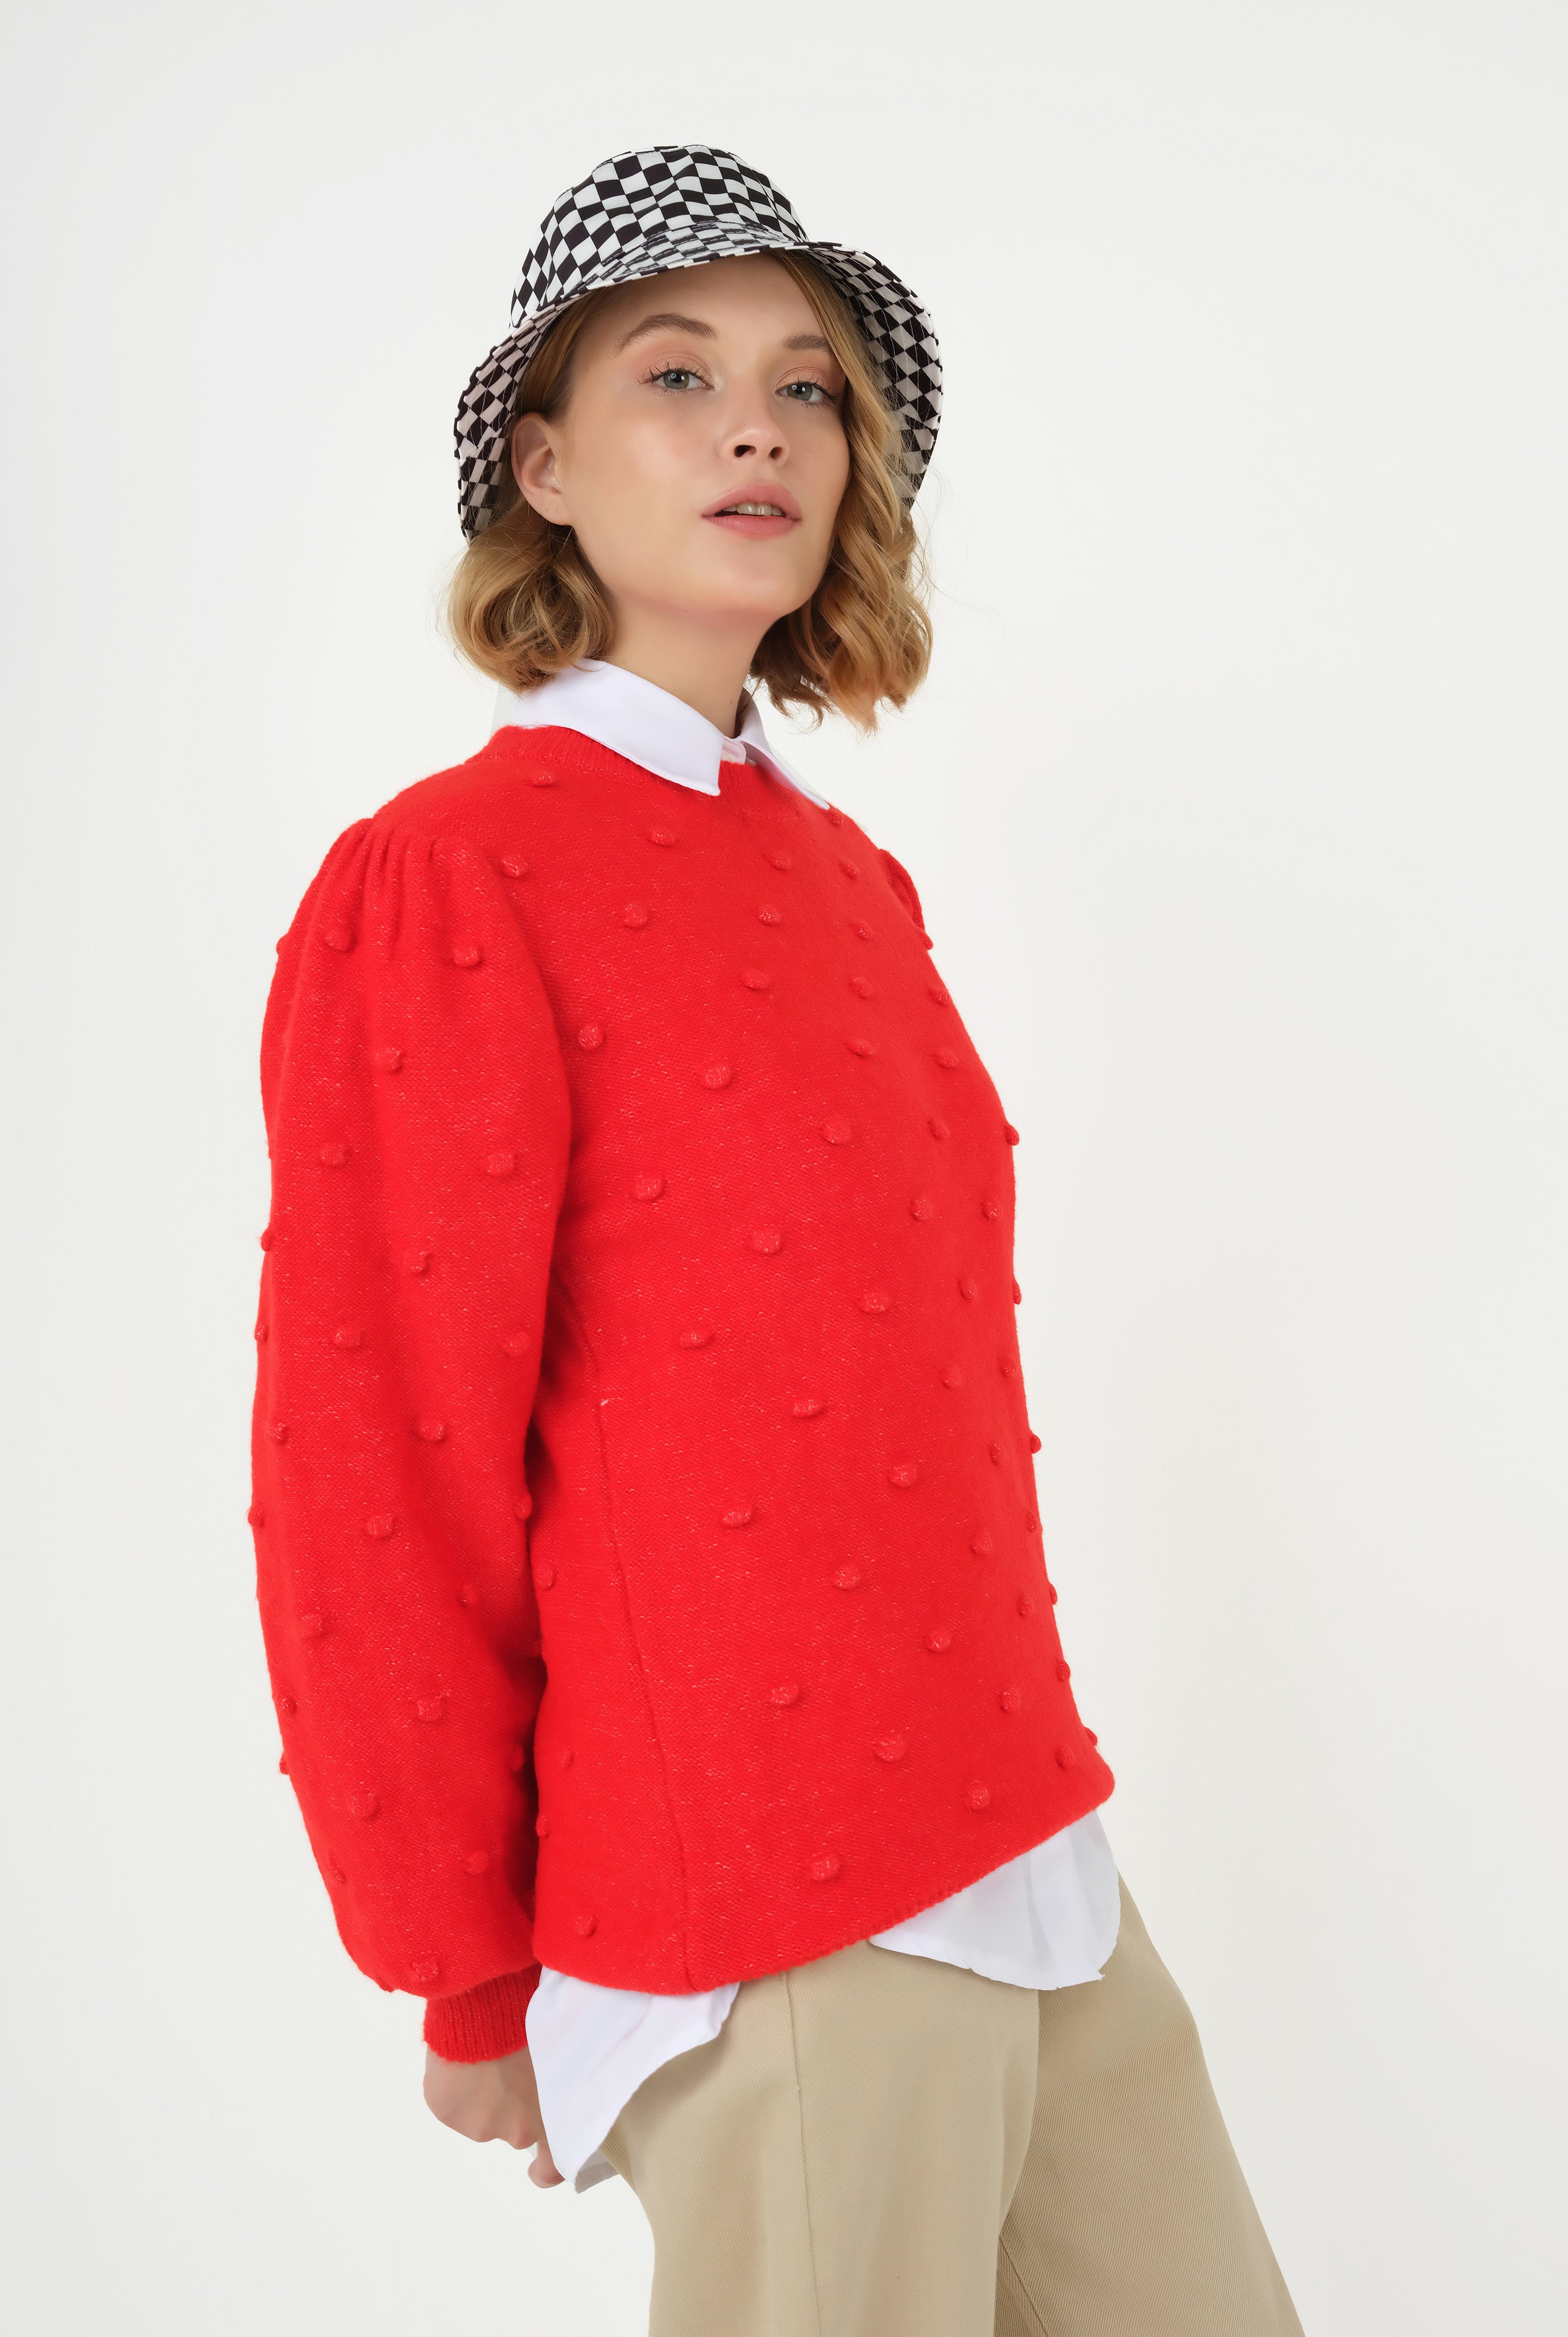 Chickpeas Sweater Red 